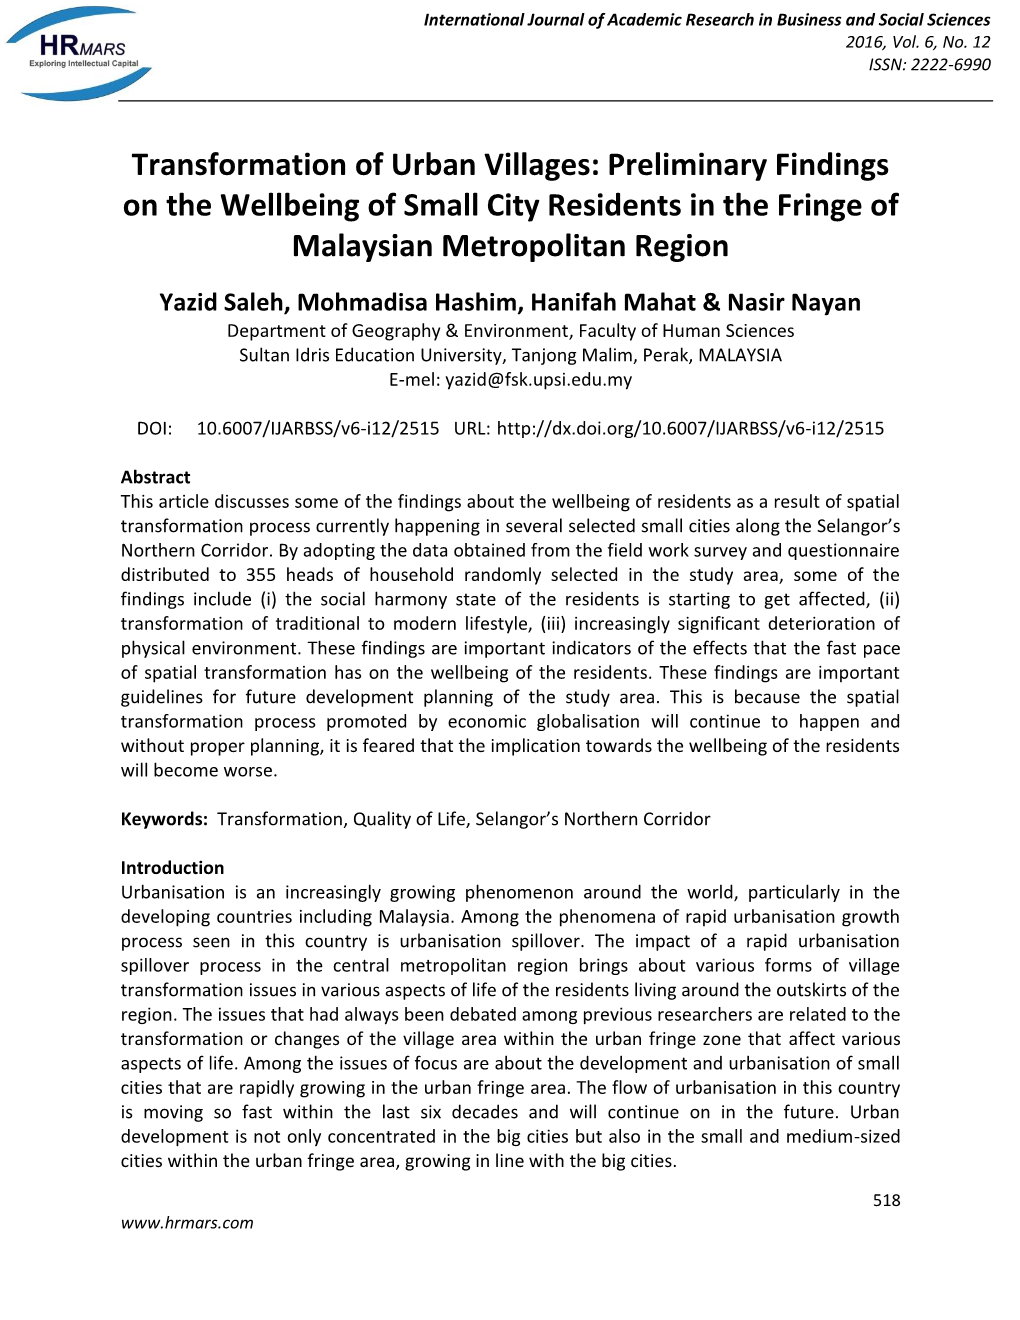 Preliminary Findings on the Wellbeing of Small City Residents In